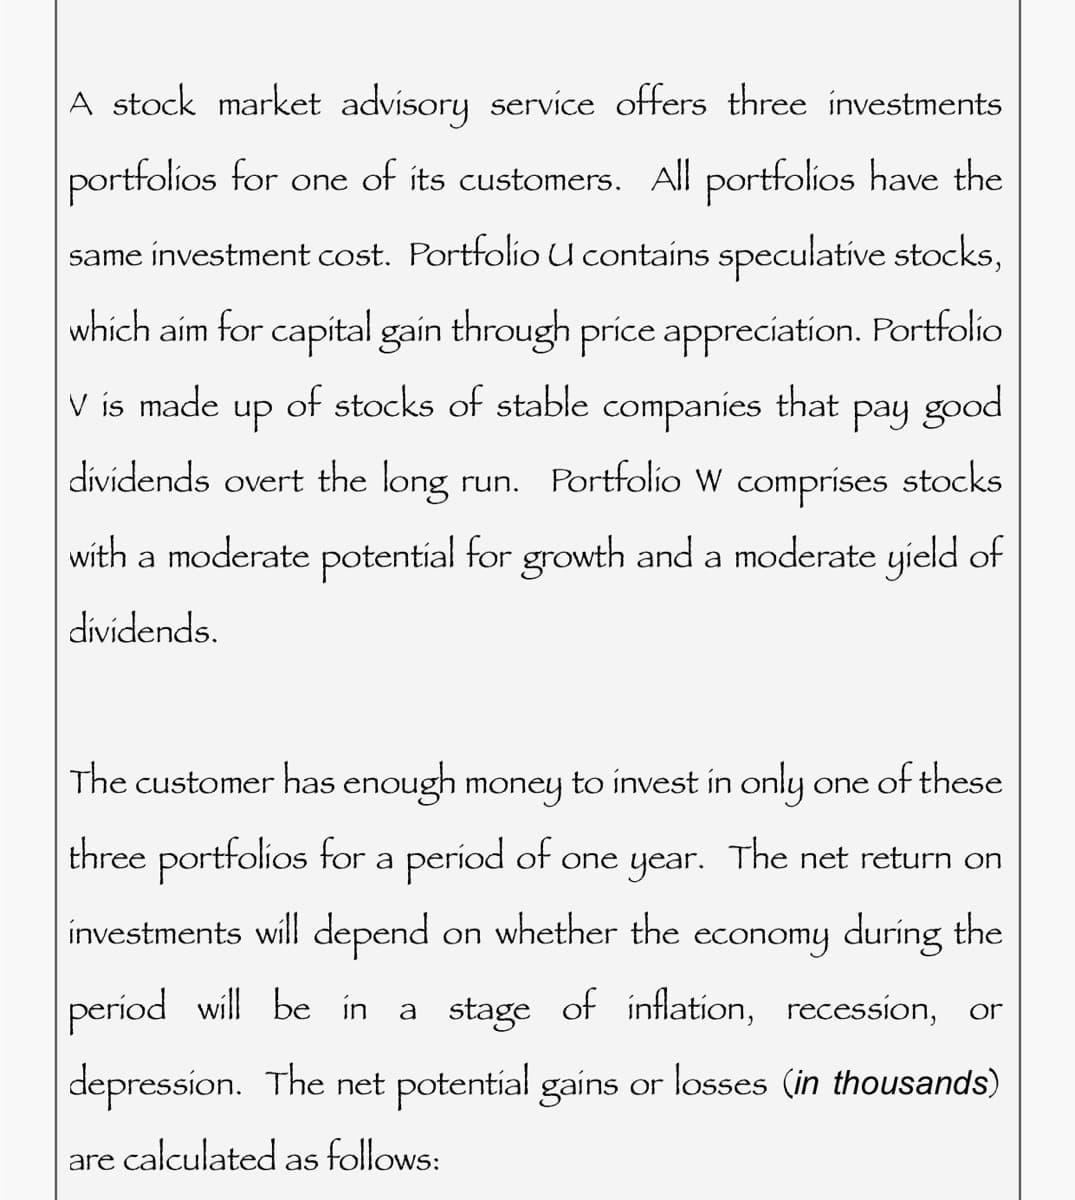 A stock market advisory service offers three investments
portfolios for one of its customers. All portfolios have the
same investment cost. Portfolio U contains speculative stocks,
which aim for capital gain through price appreciation. Portfolio
V is made
up of stocks of stable companies that pay good
dividends overt the long run. Portfolio W comprises stocks
with a moderate potential for growth and a moderate yield of
dividends.
The customer has enough money to invest in only one of these
three portfolios for a period of one year. The net return on
investments will depend on whether the economy during the
period will be in a stage of inflation, recession, or
depression. The net potential gains or losses (in thousands)
are calculated follows:
as